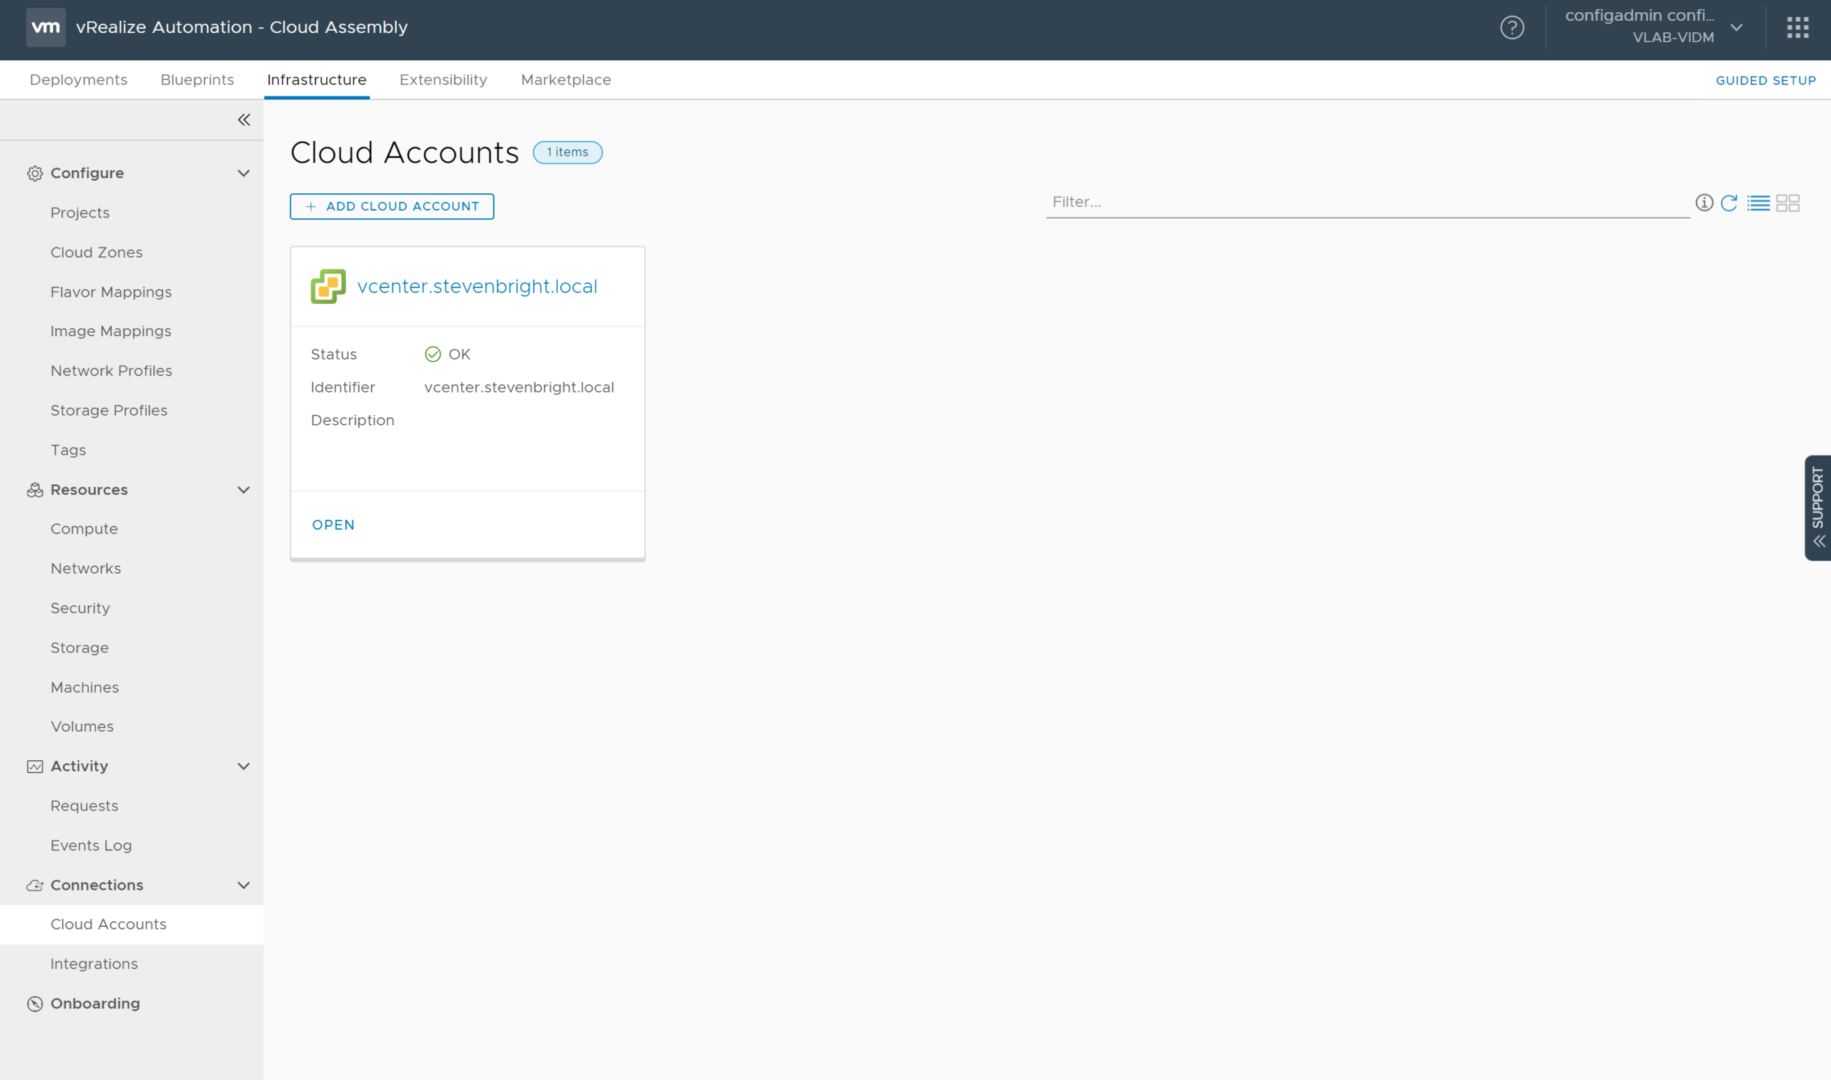 vRealize Automation 8.0 - Cloud Assembly - Cloud Accounts - With New vCenter Server